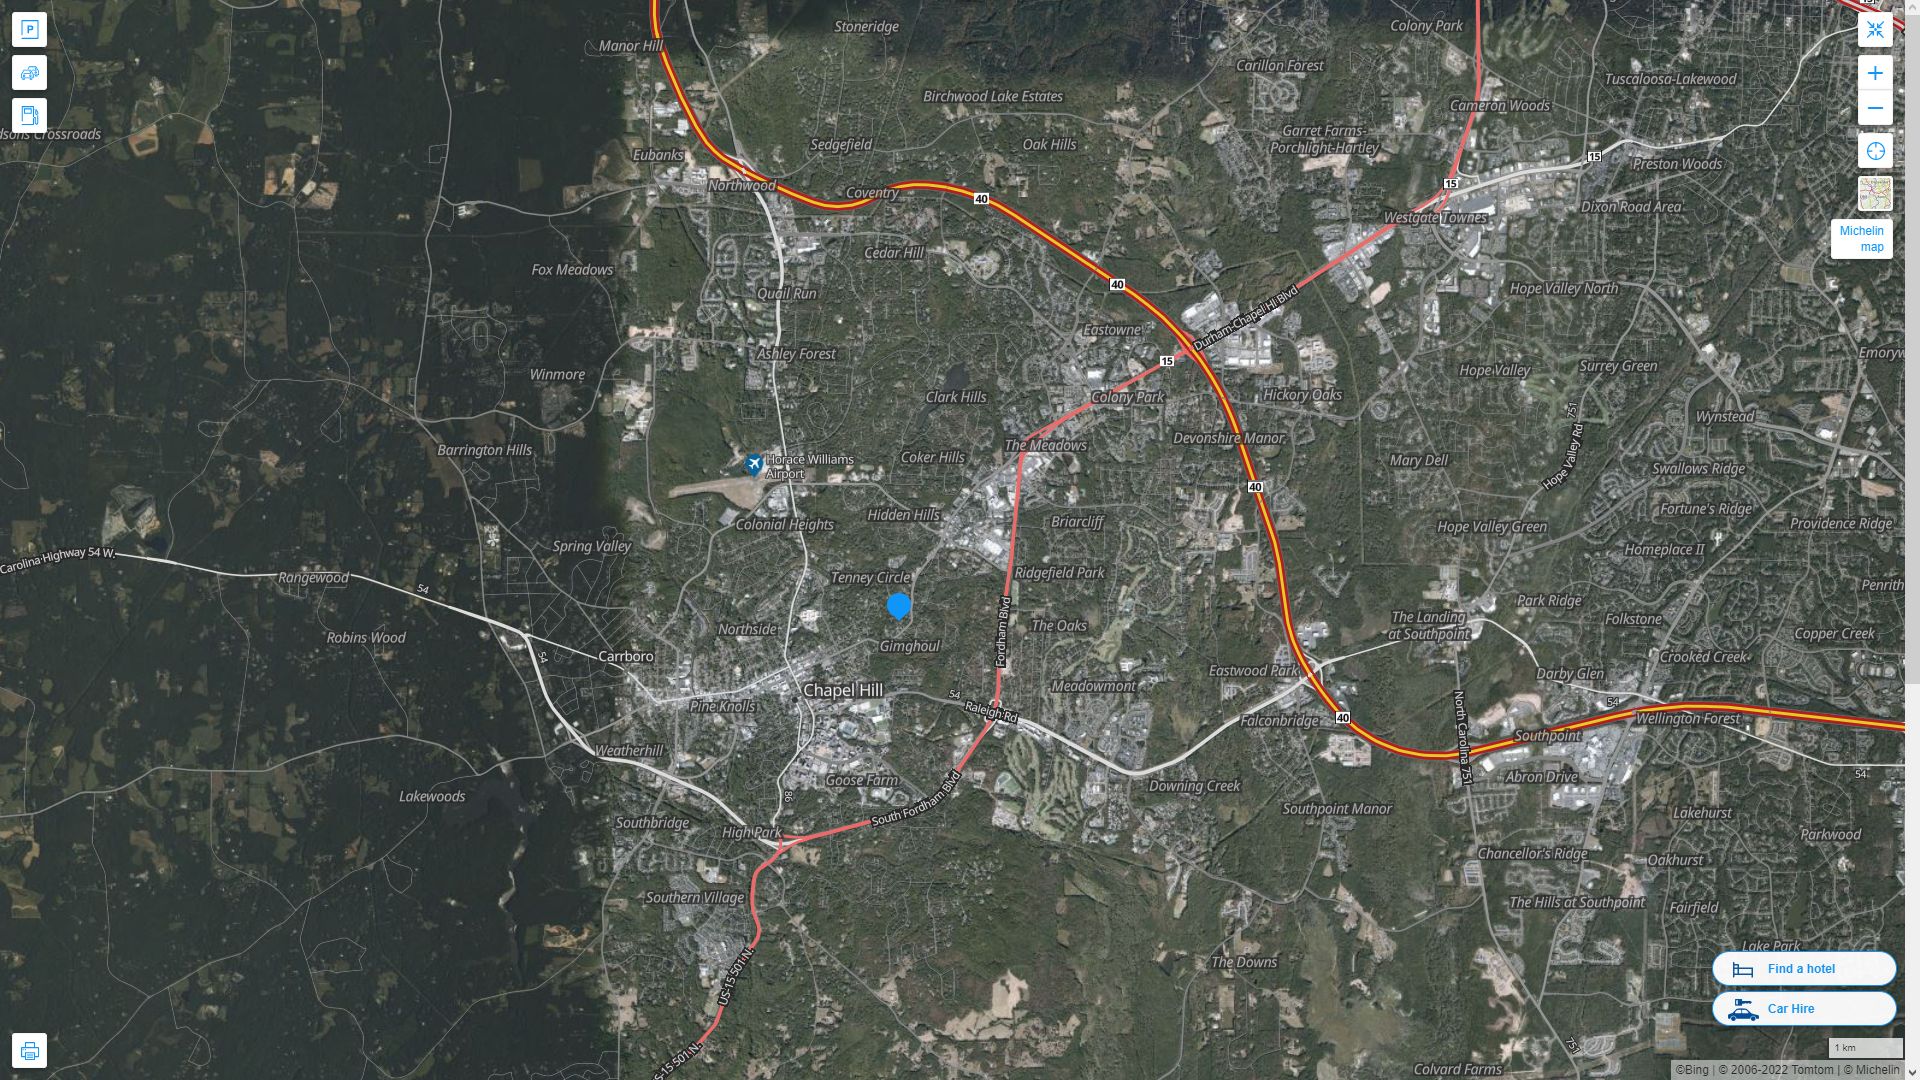 Chapel Hill North Carolina Highway and Road Map with Satellite View